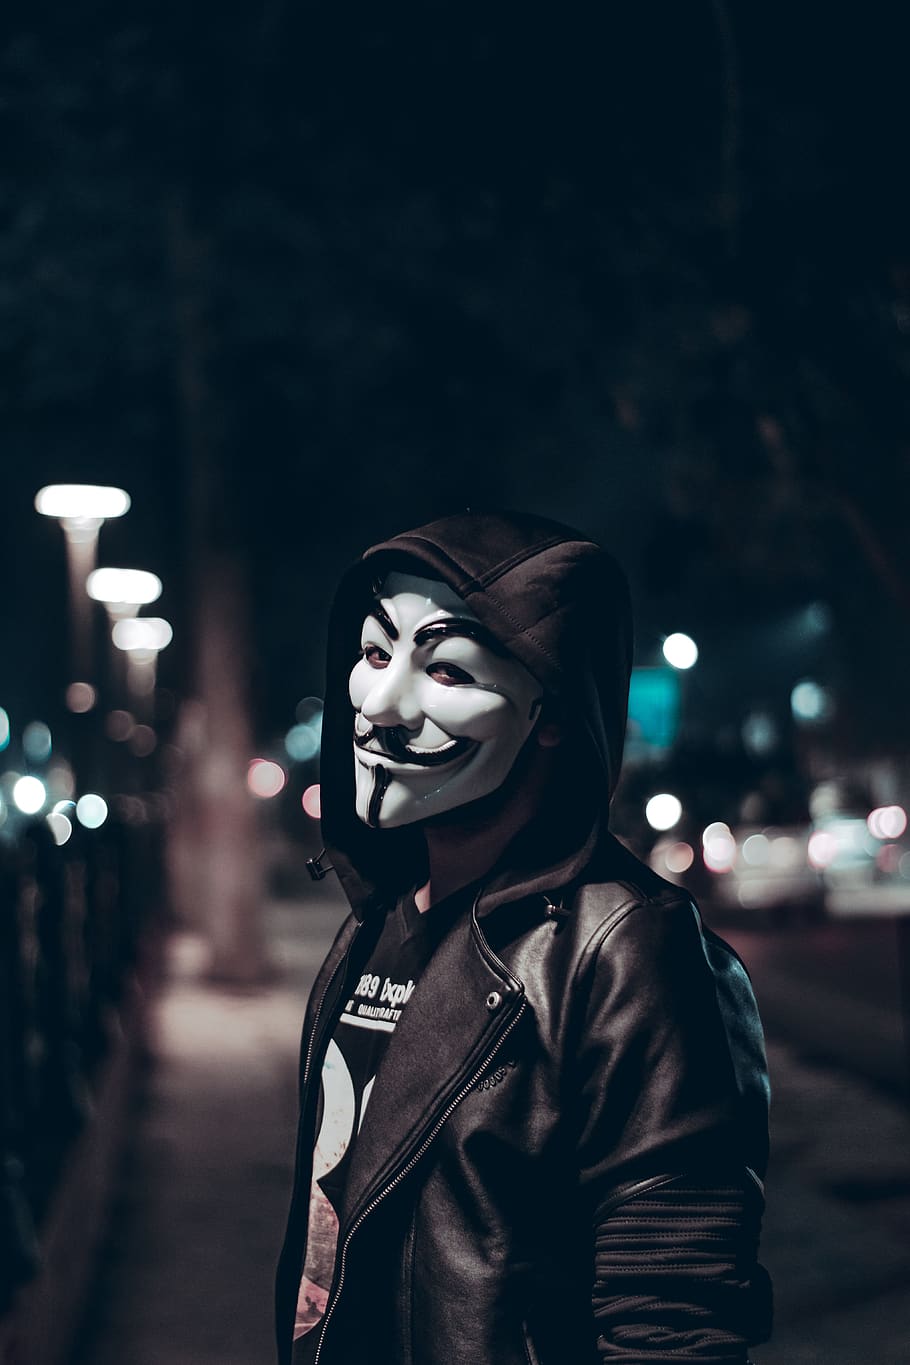 HD wallpaper: Person Wearing Guy Fawkes Mask, black leather jacket, blur, city lights